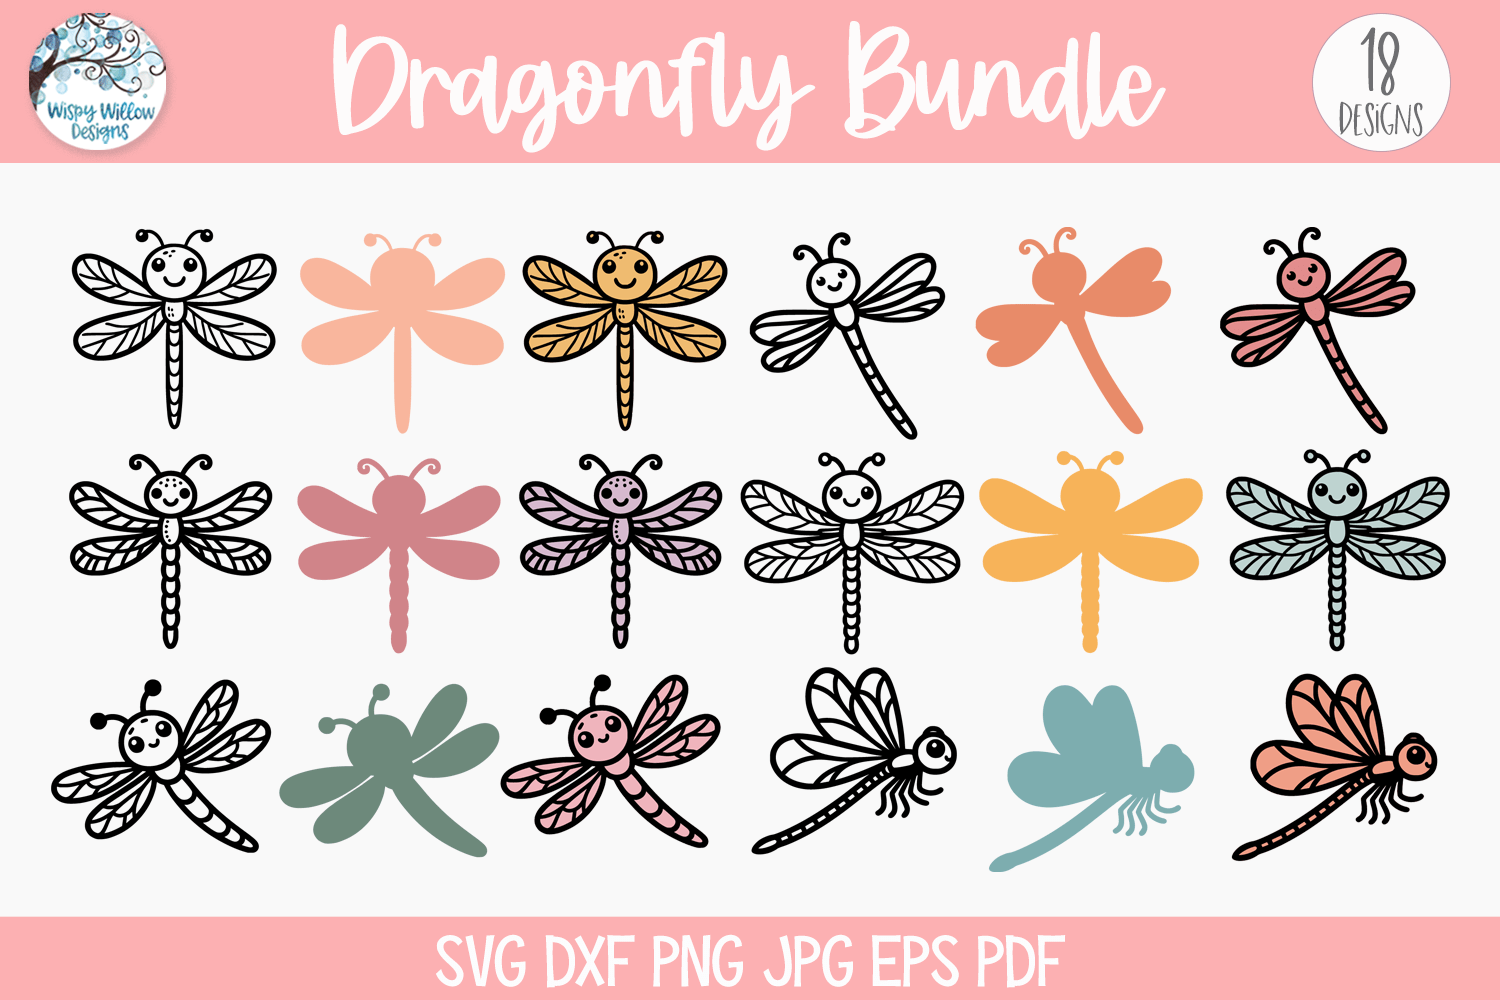 Dragonfly Bundle SVG | Dragonfly Silhouette Clipart Wispy Willow Designs Company